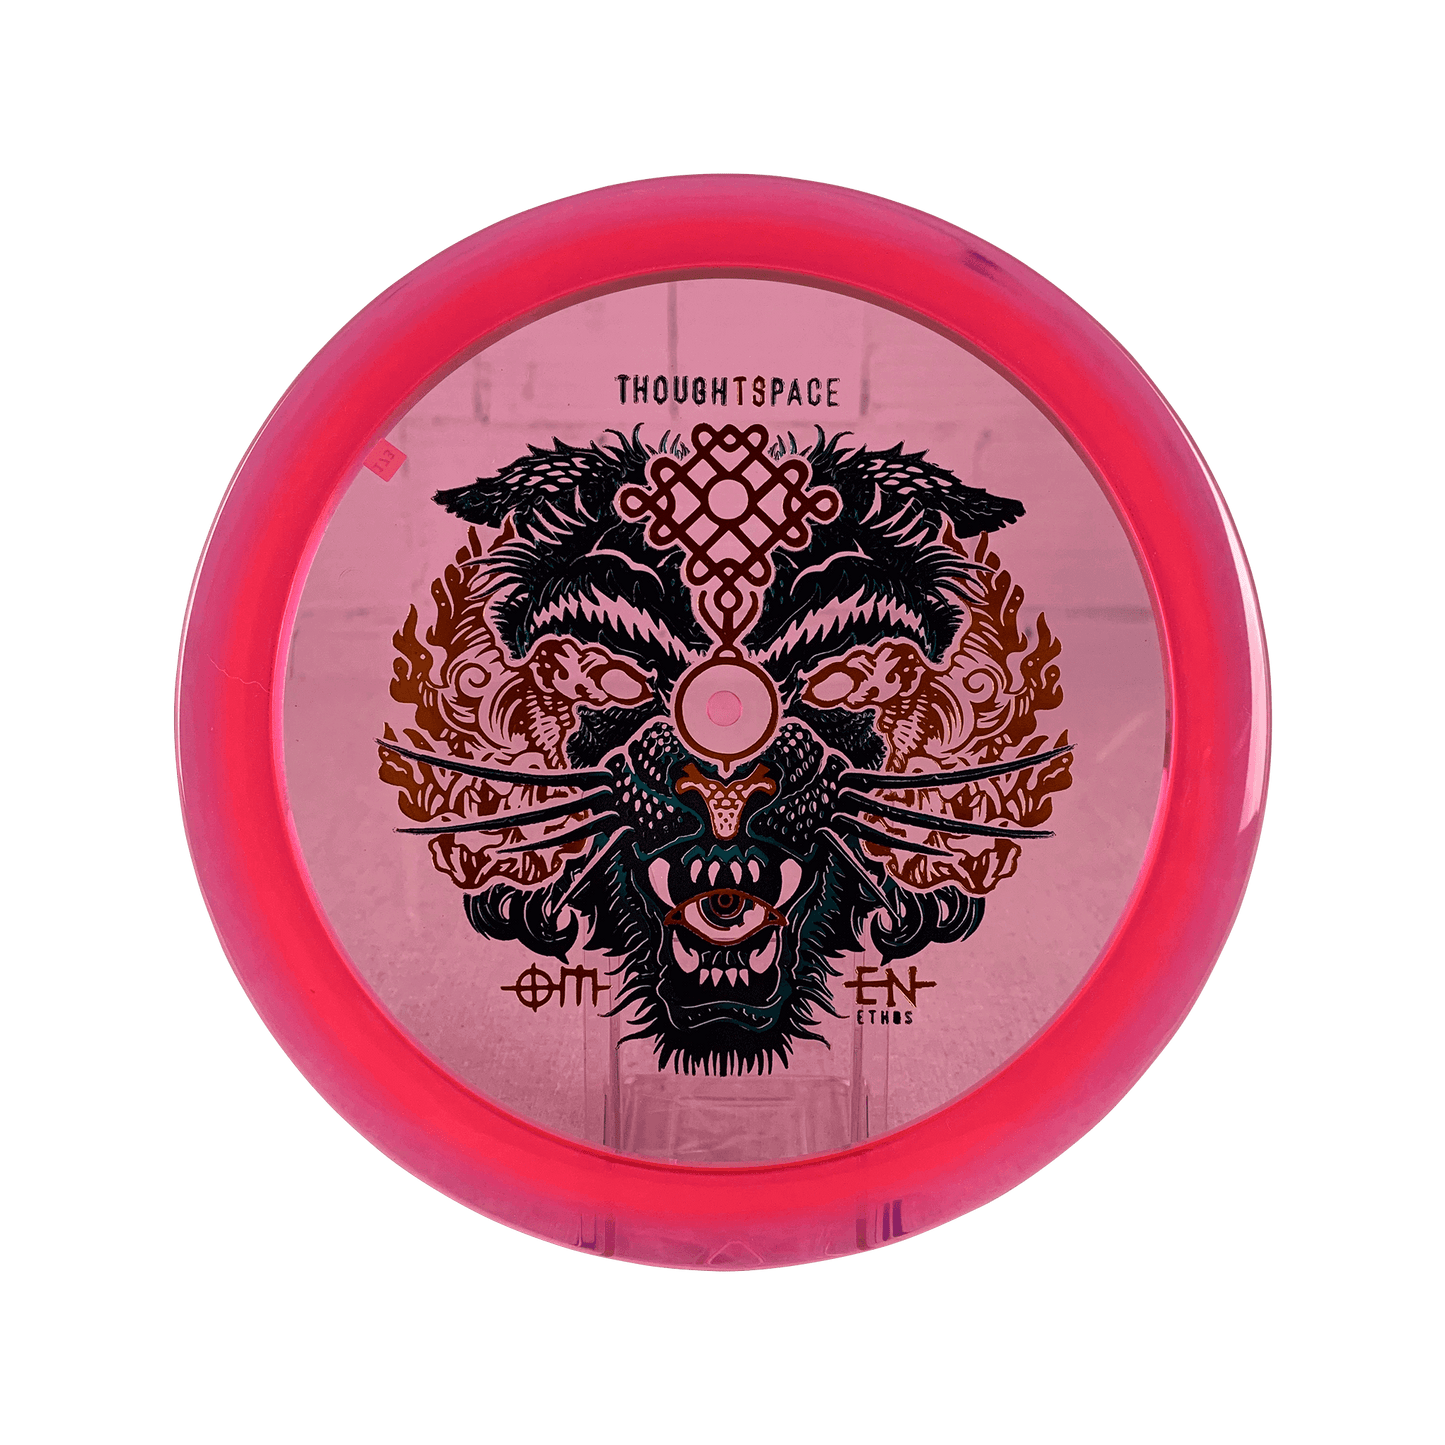 Ethos Omen Disc Thought Space Athletics pink 173 